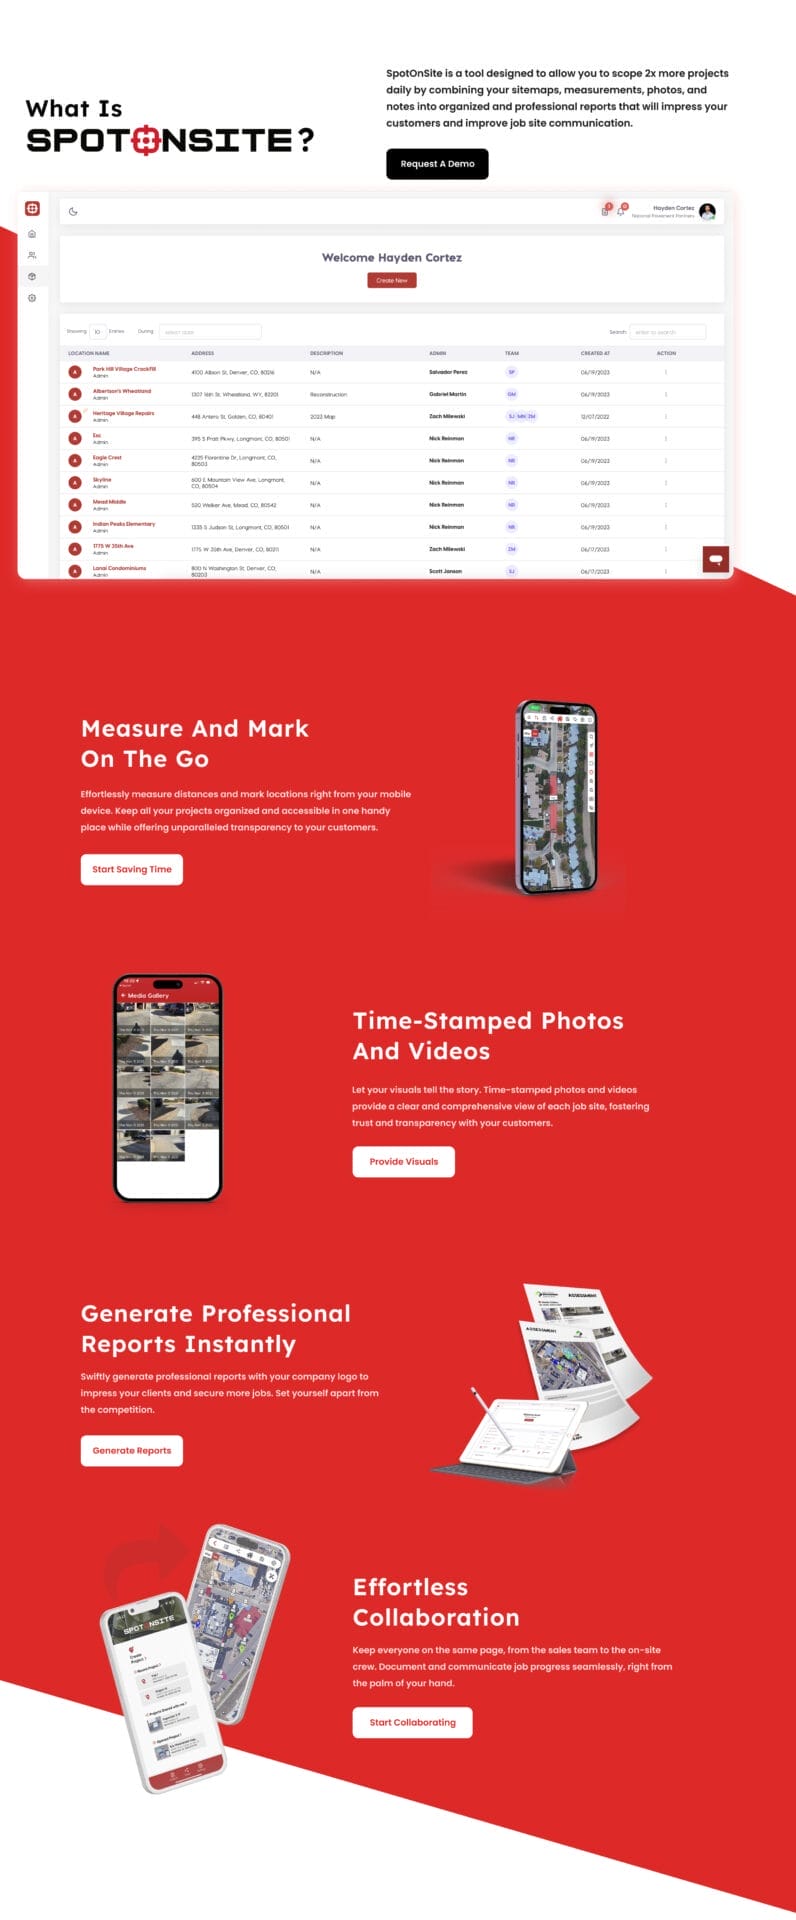 A red and white website with a red background.